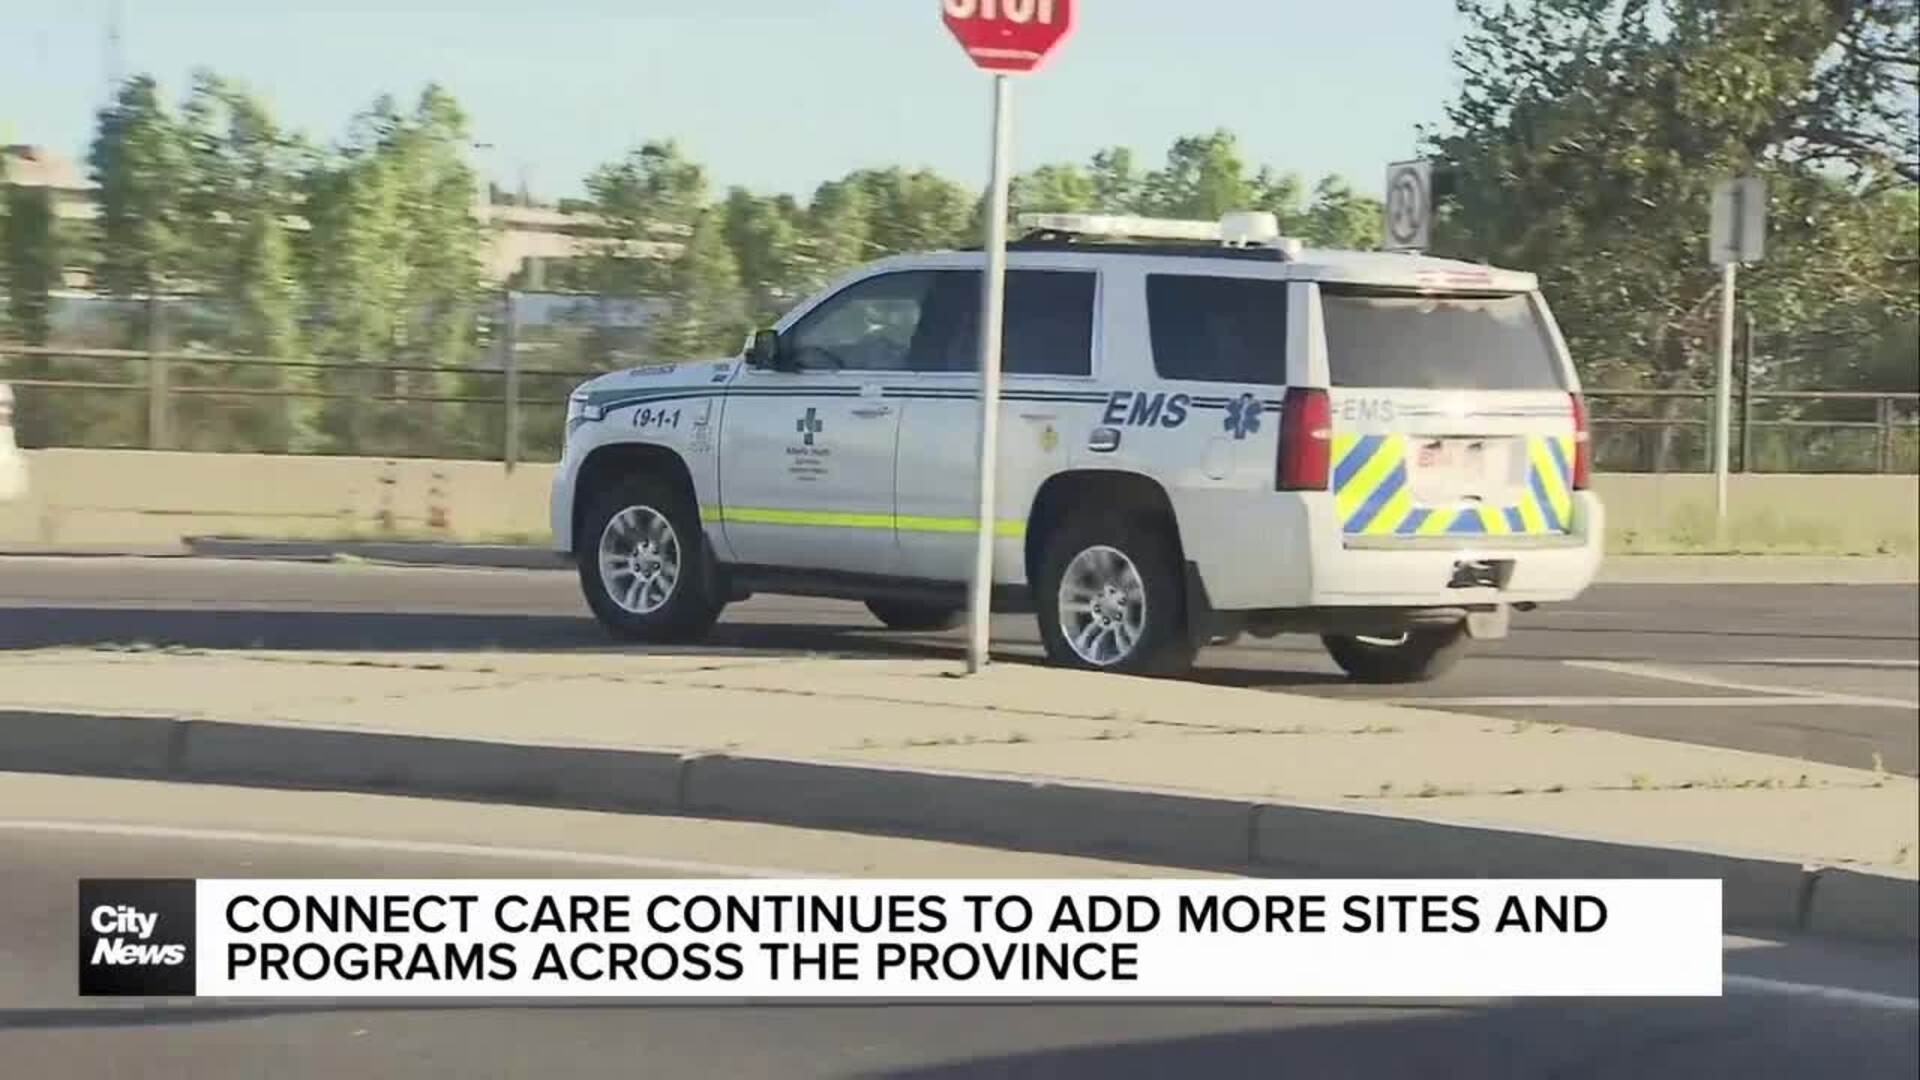 Connect Care continues to add more sites and programs across the province